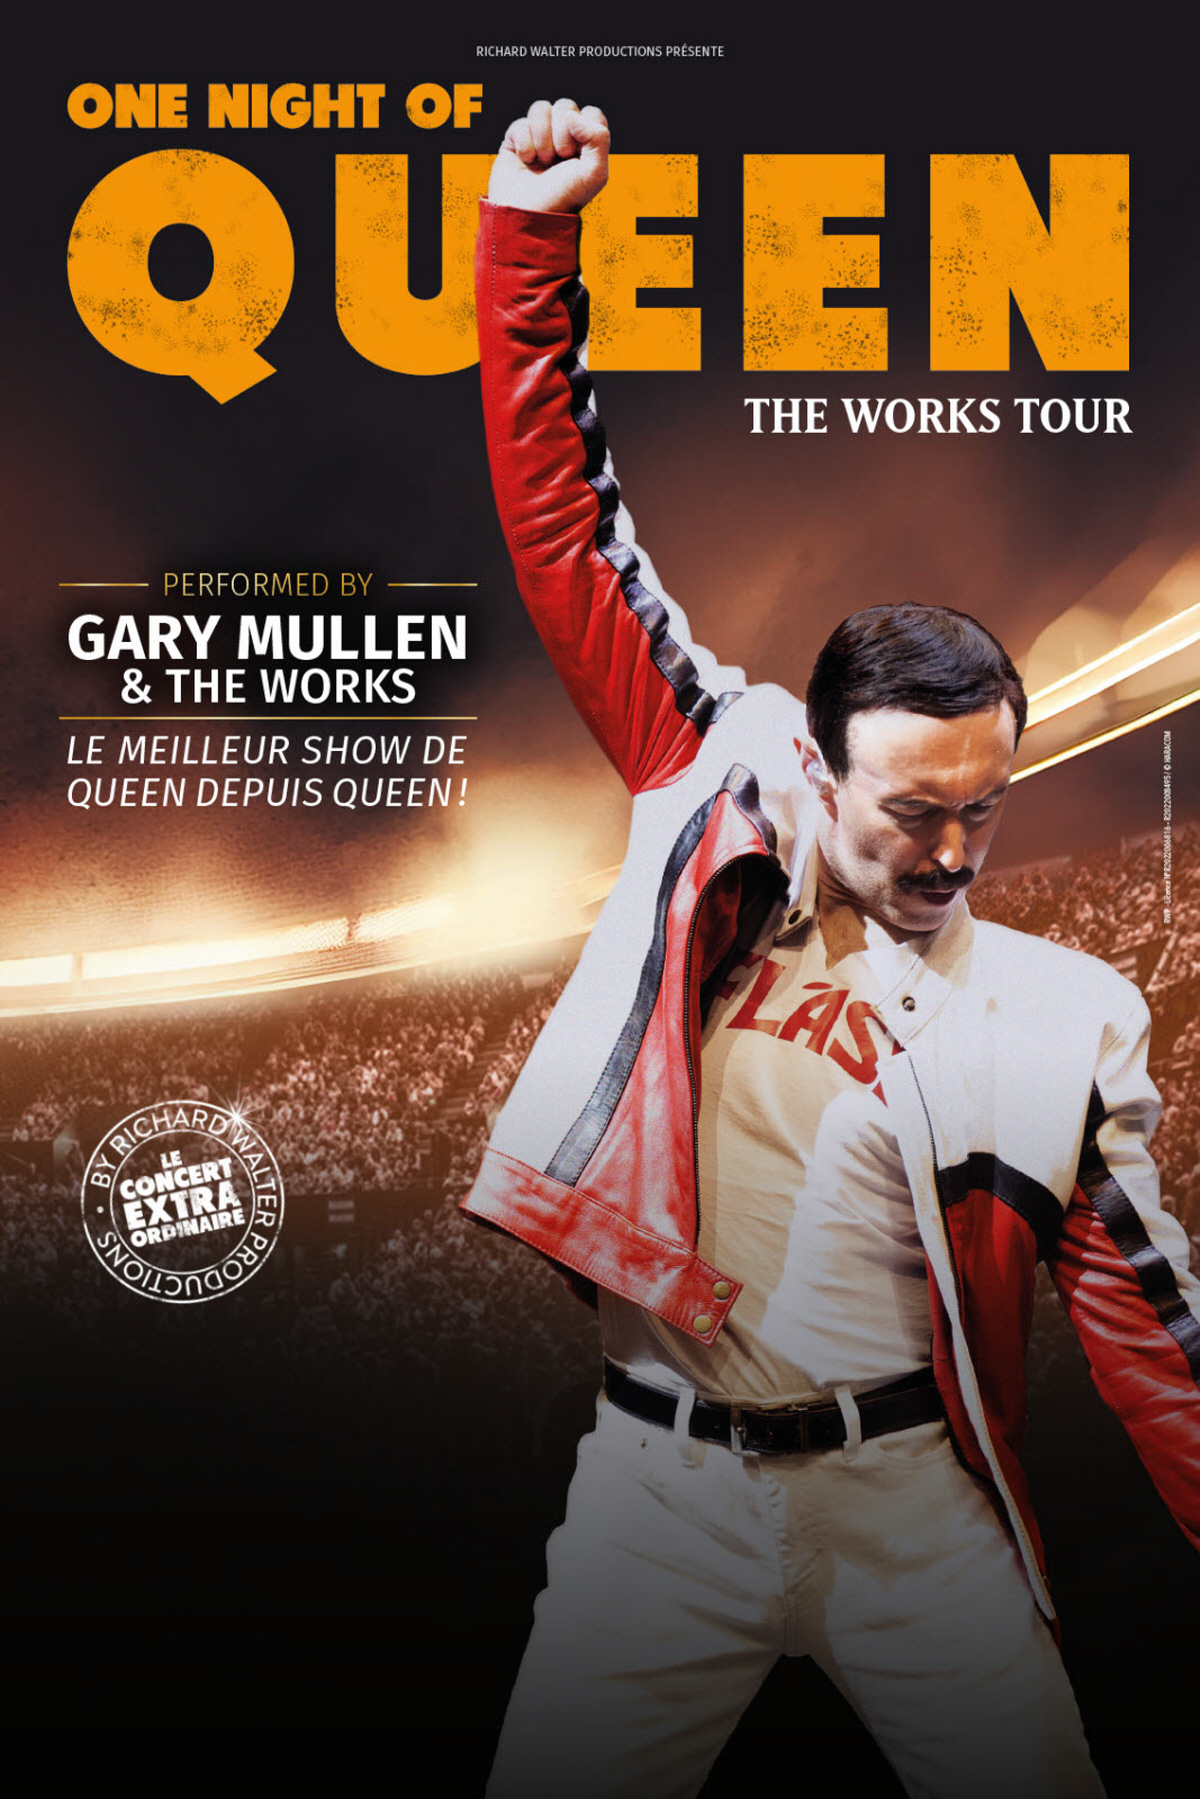 One Night Of Queen - The Works Tour in der L'Acclameur Tickets